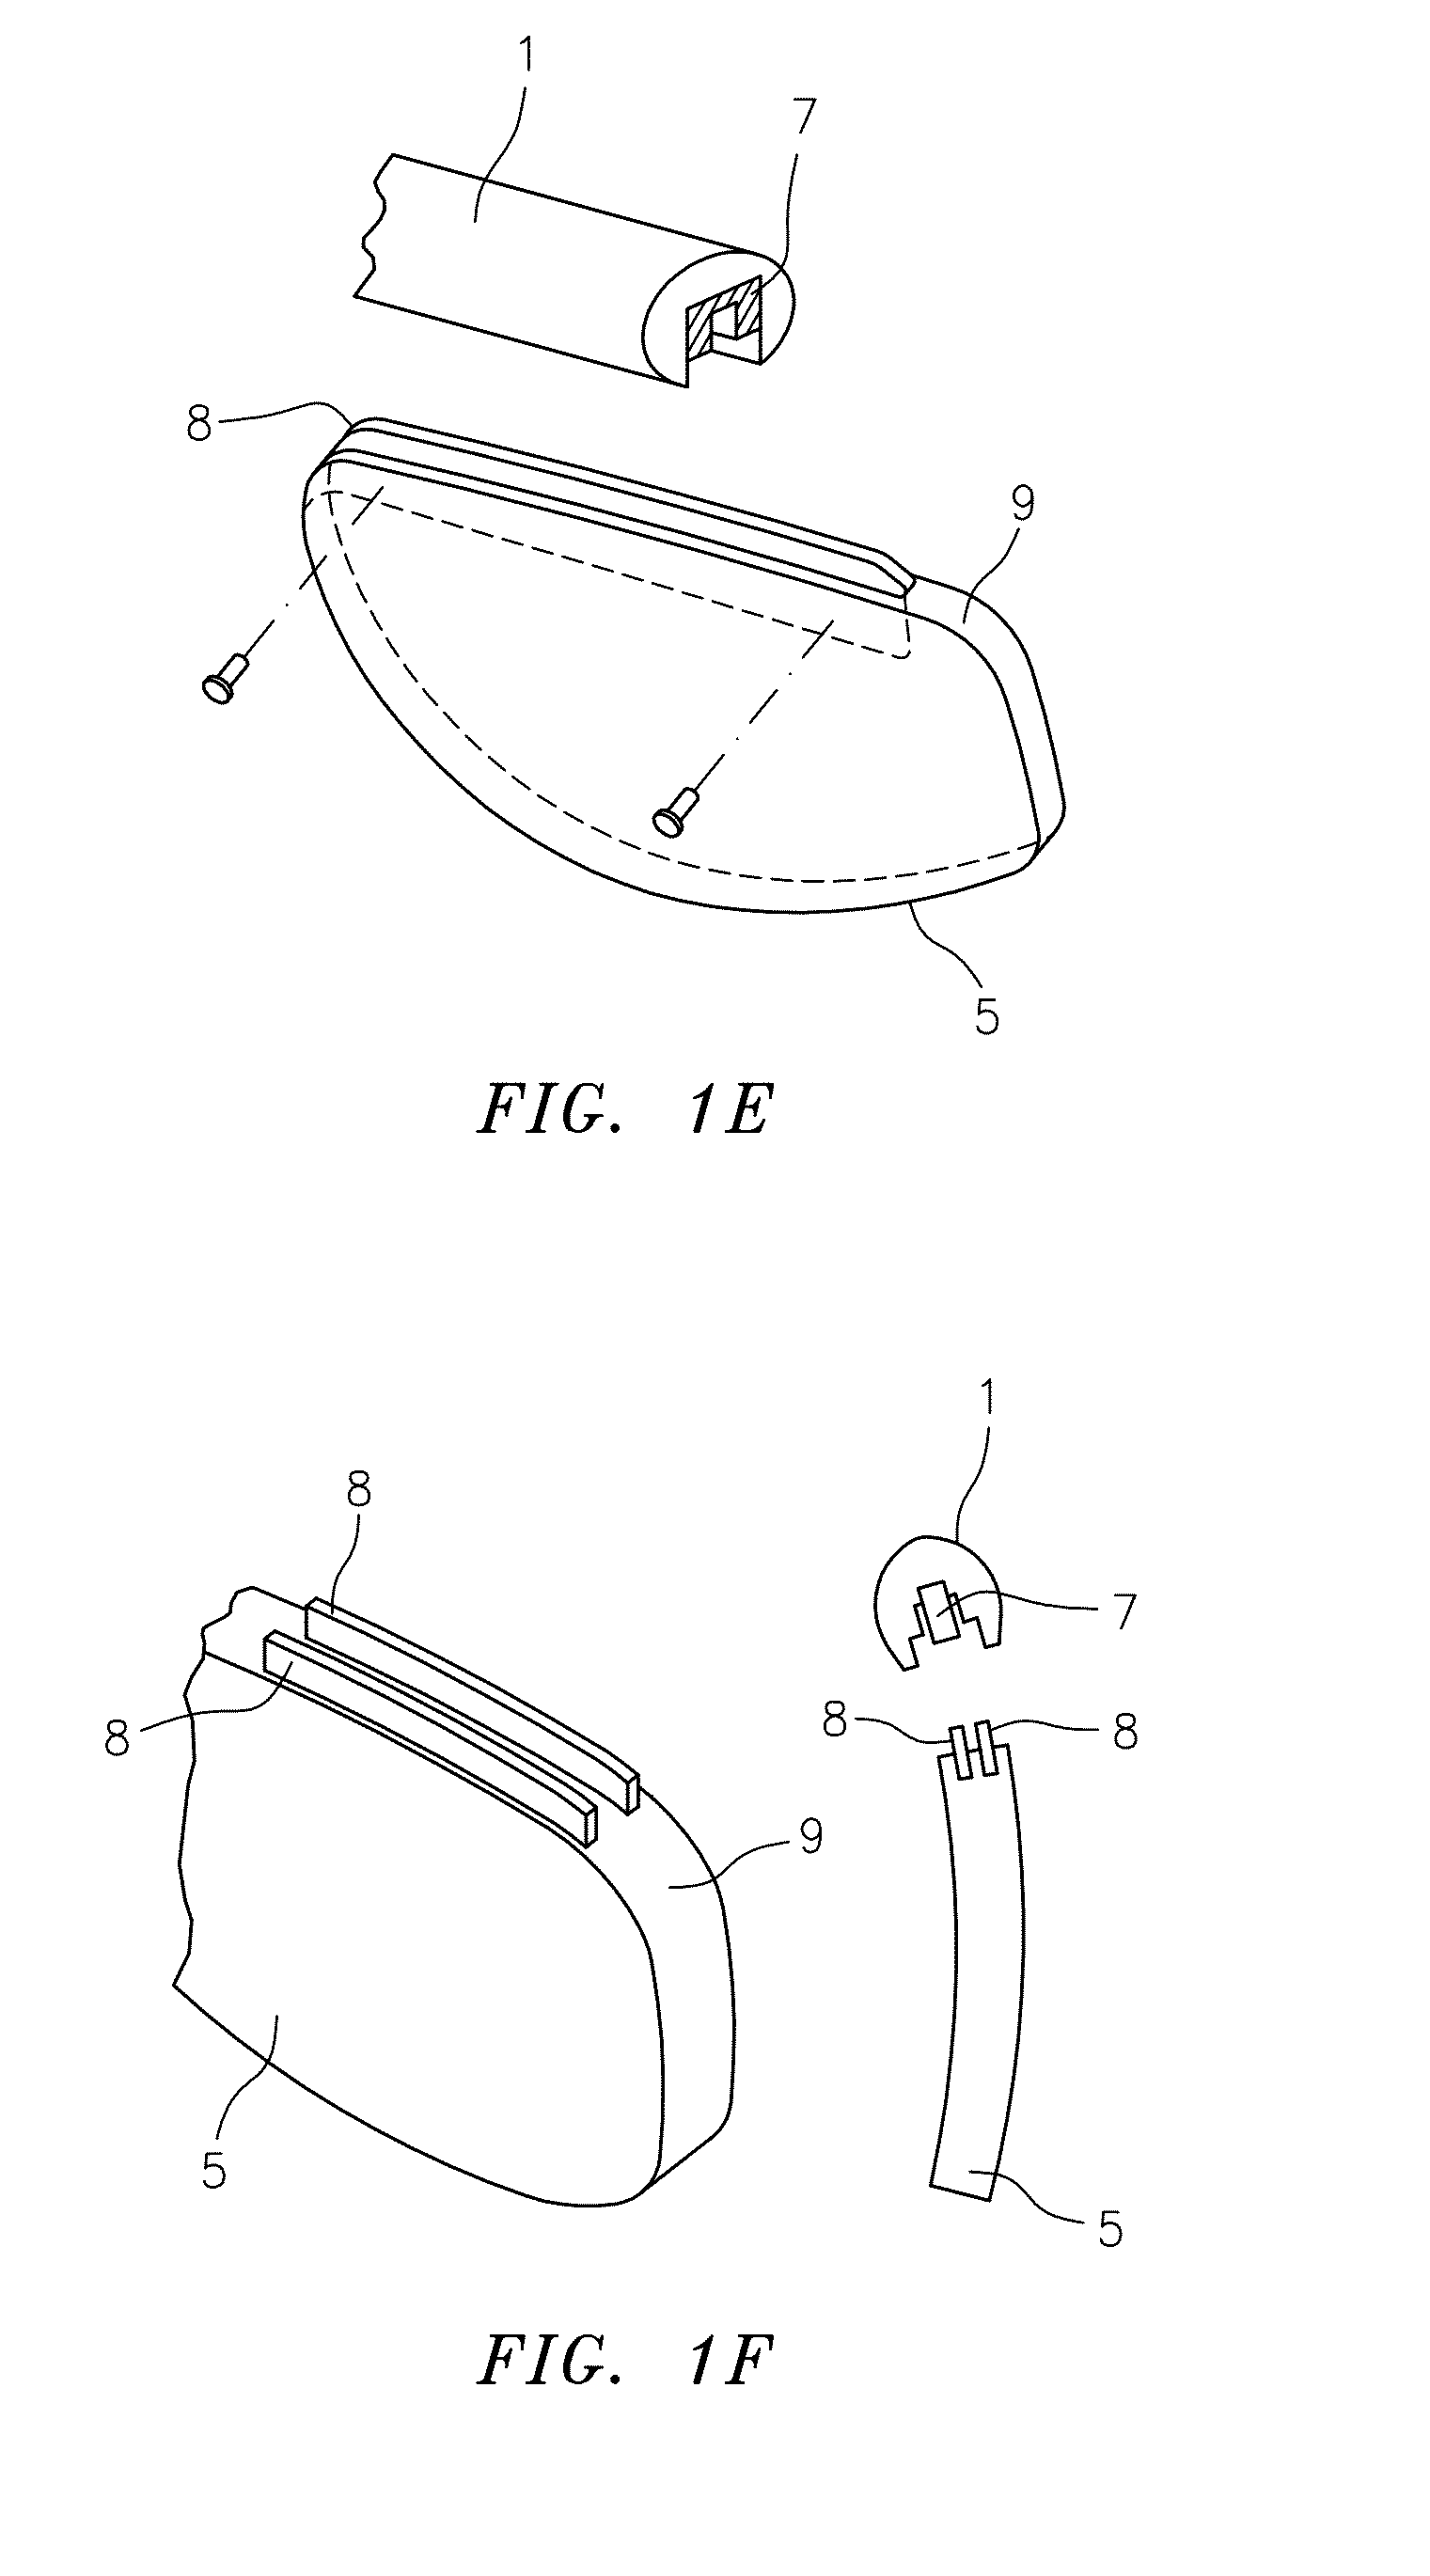 Eyewear frames with magnetic lens attachments